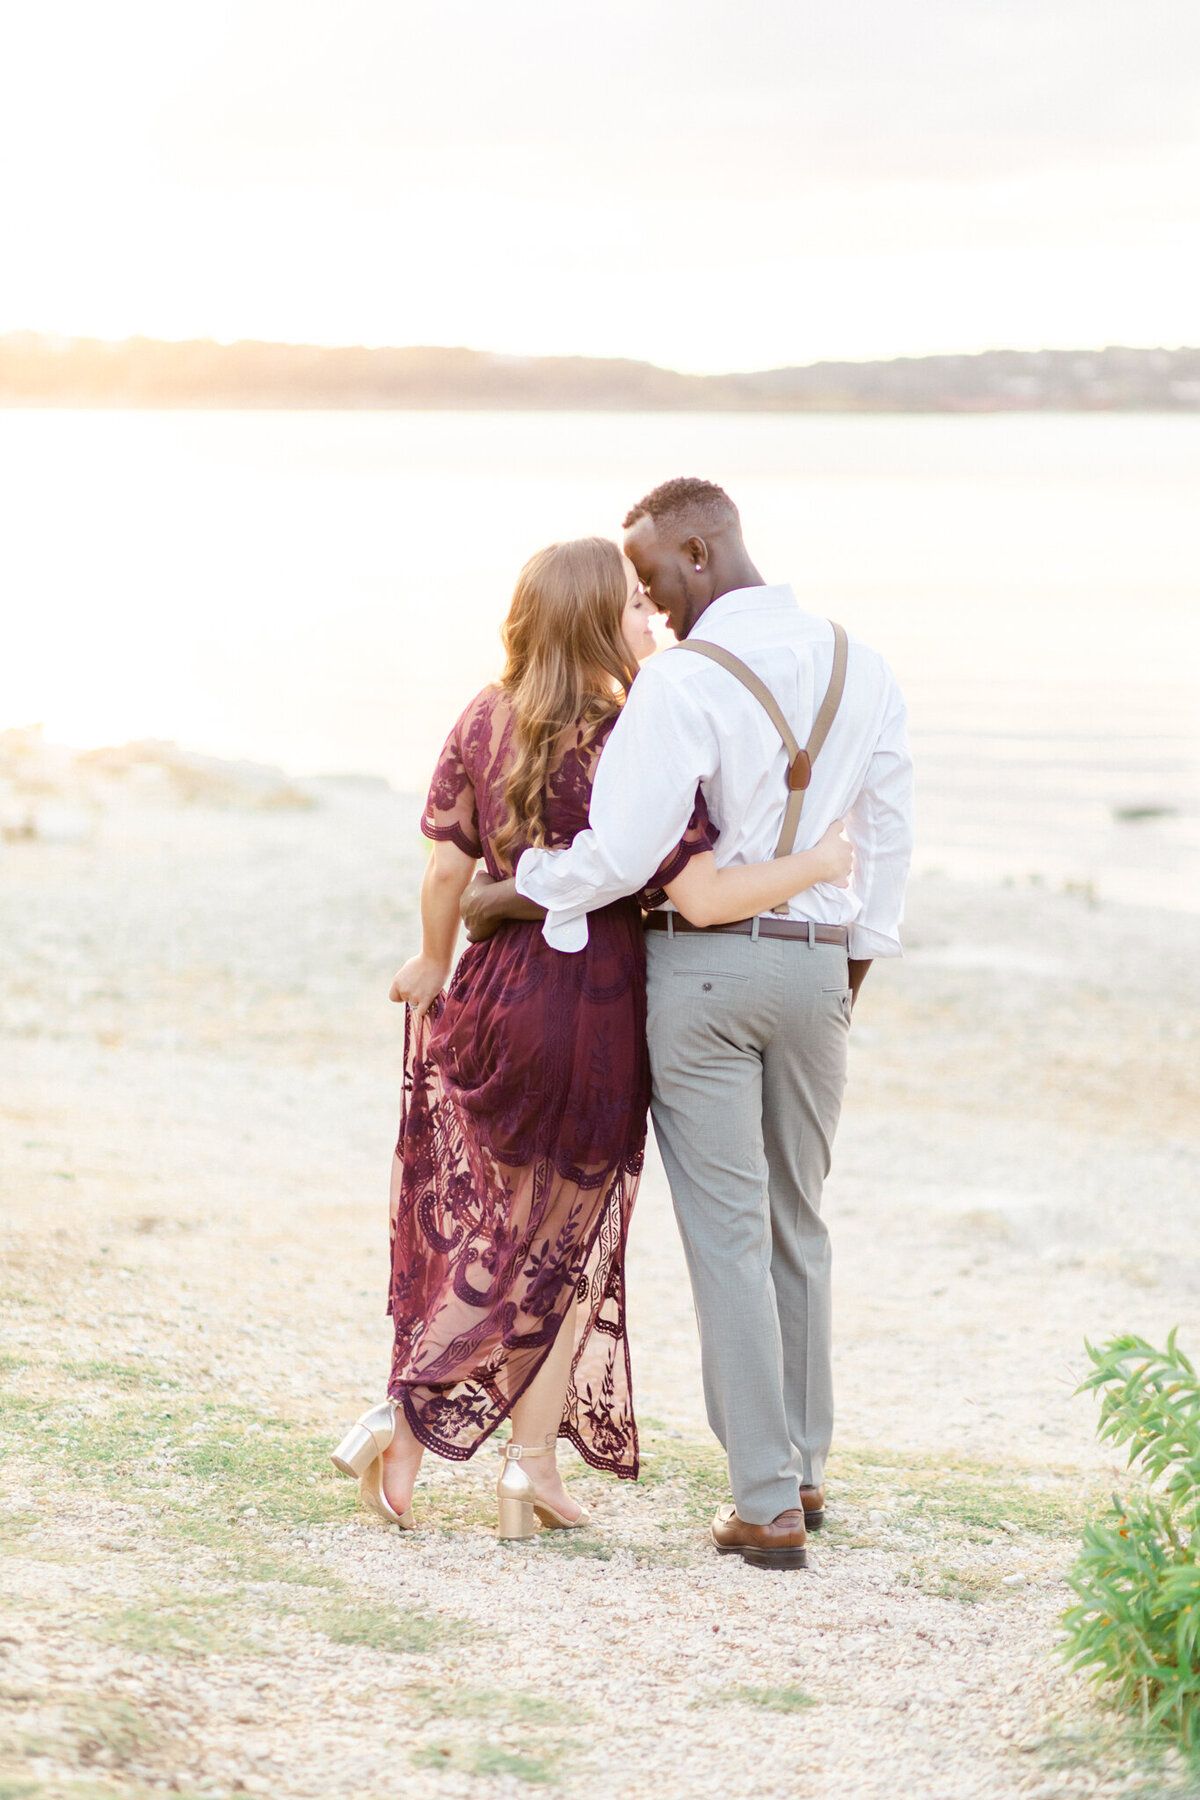 Jessica Chole Photography San Antonio Texas California Wedding Portrait Engagement Maternity Family Lifestyle Photographer Souther Cali TX CA Light Airy Bright Colorful Photography11